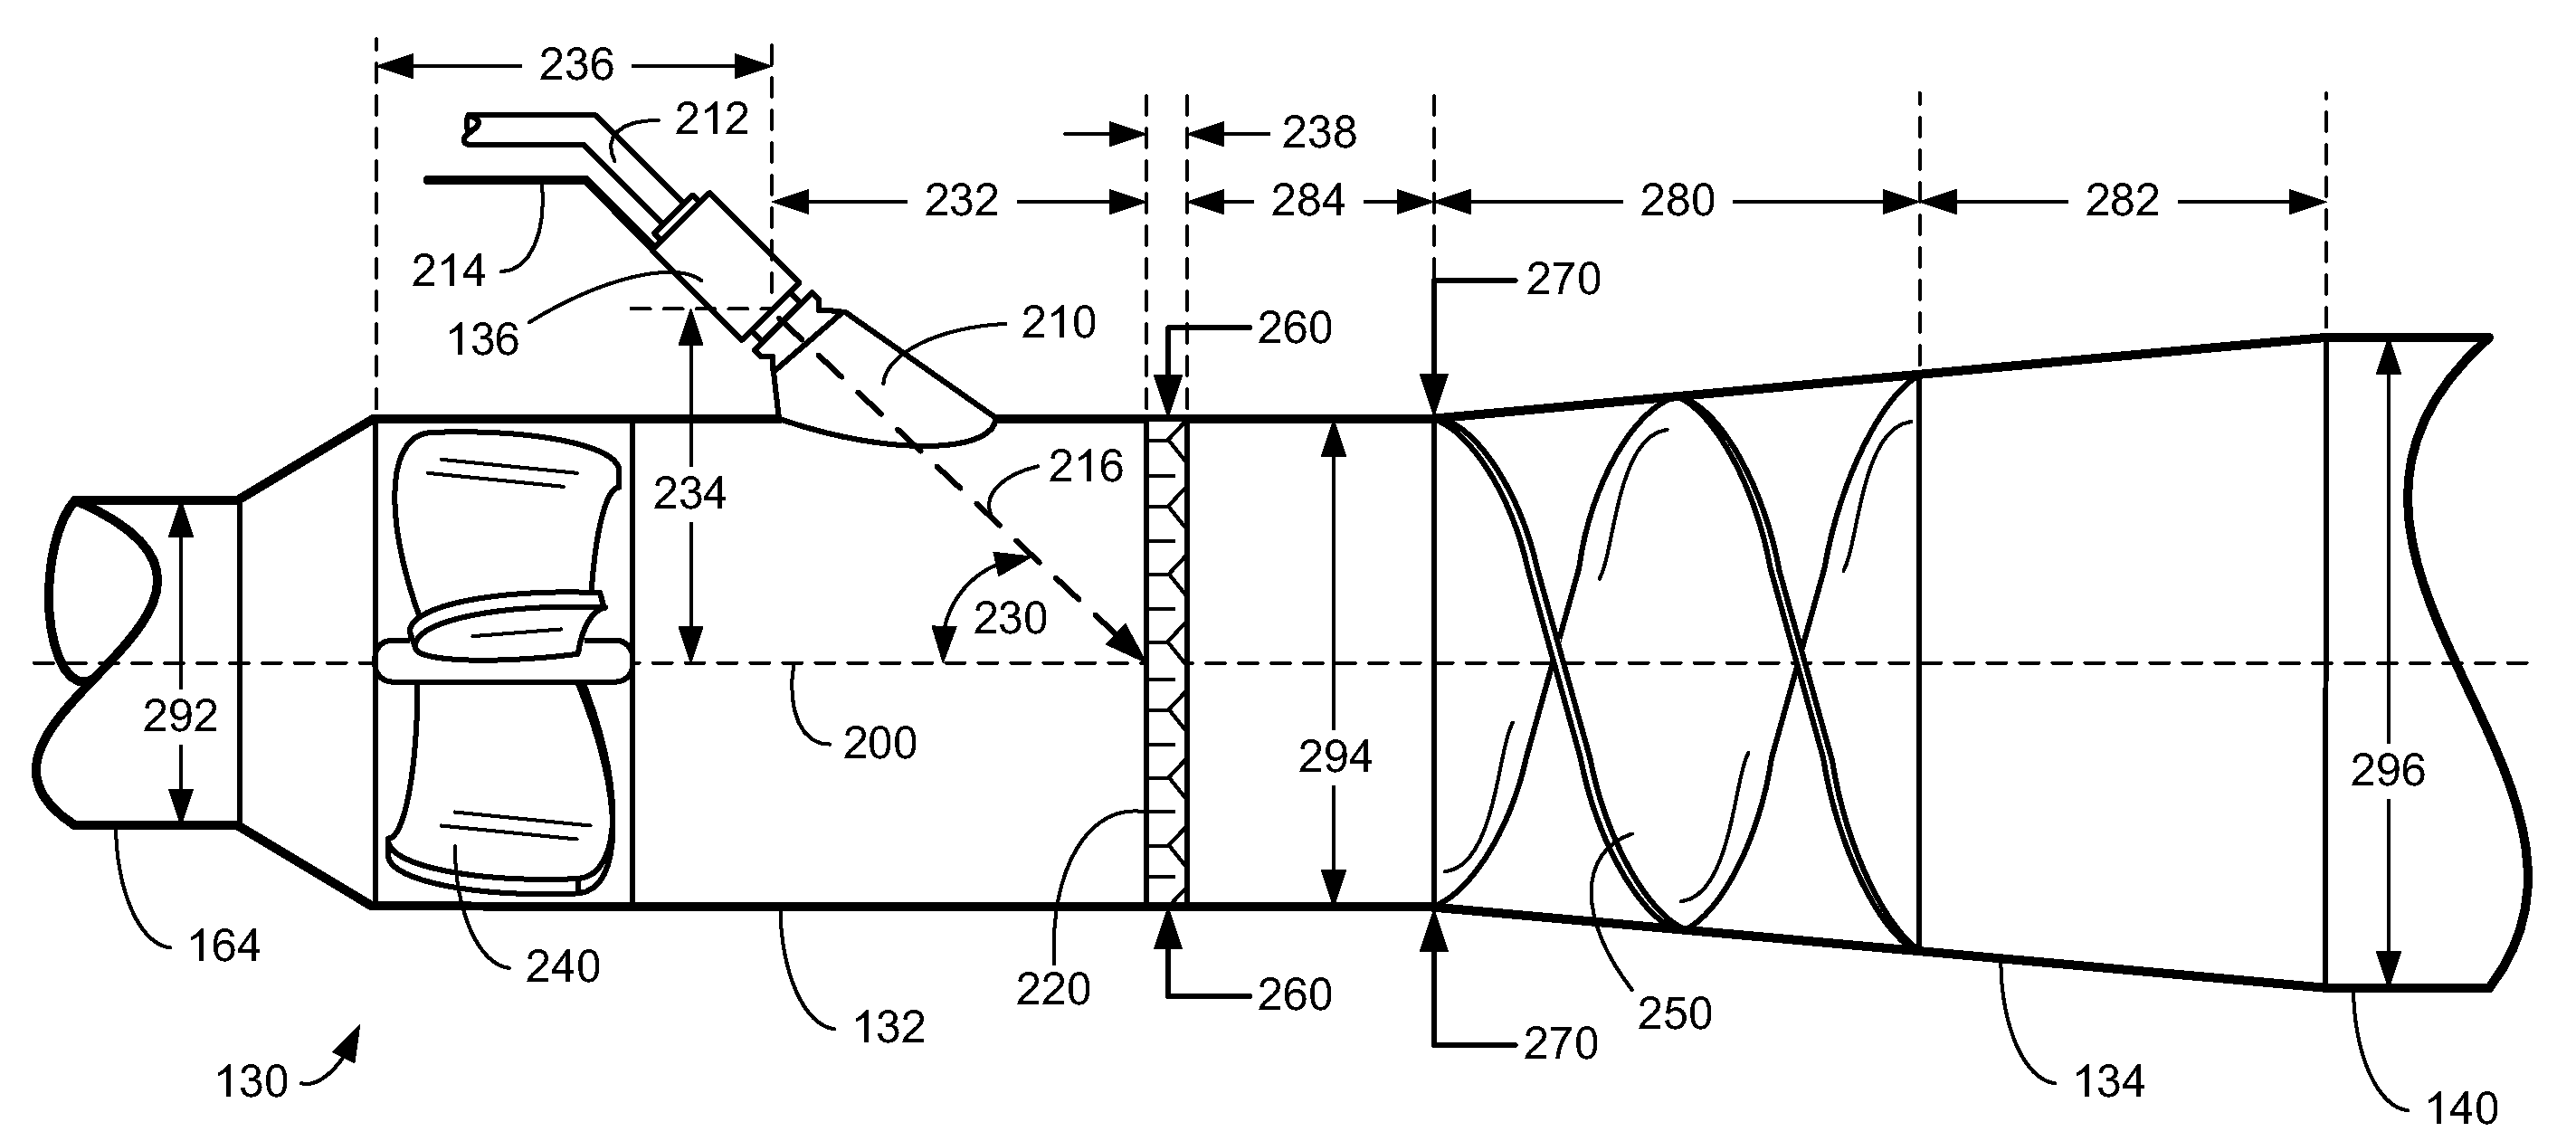 Approach for Delivering a Liquid Reductant into an Exhaust Flow of a Fuel Burning Engine